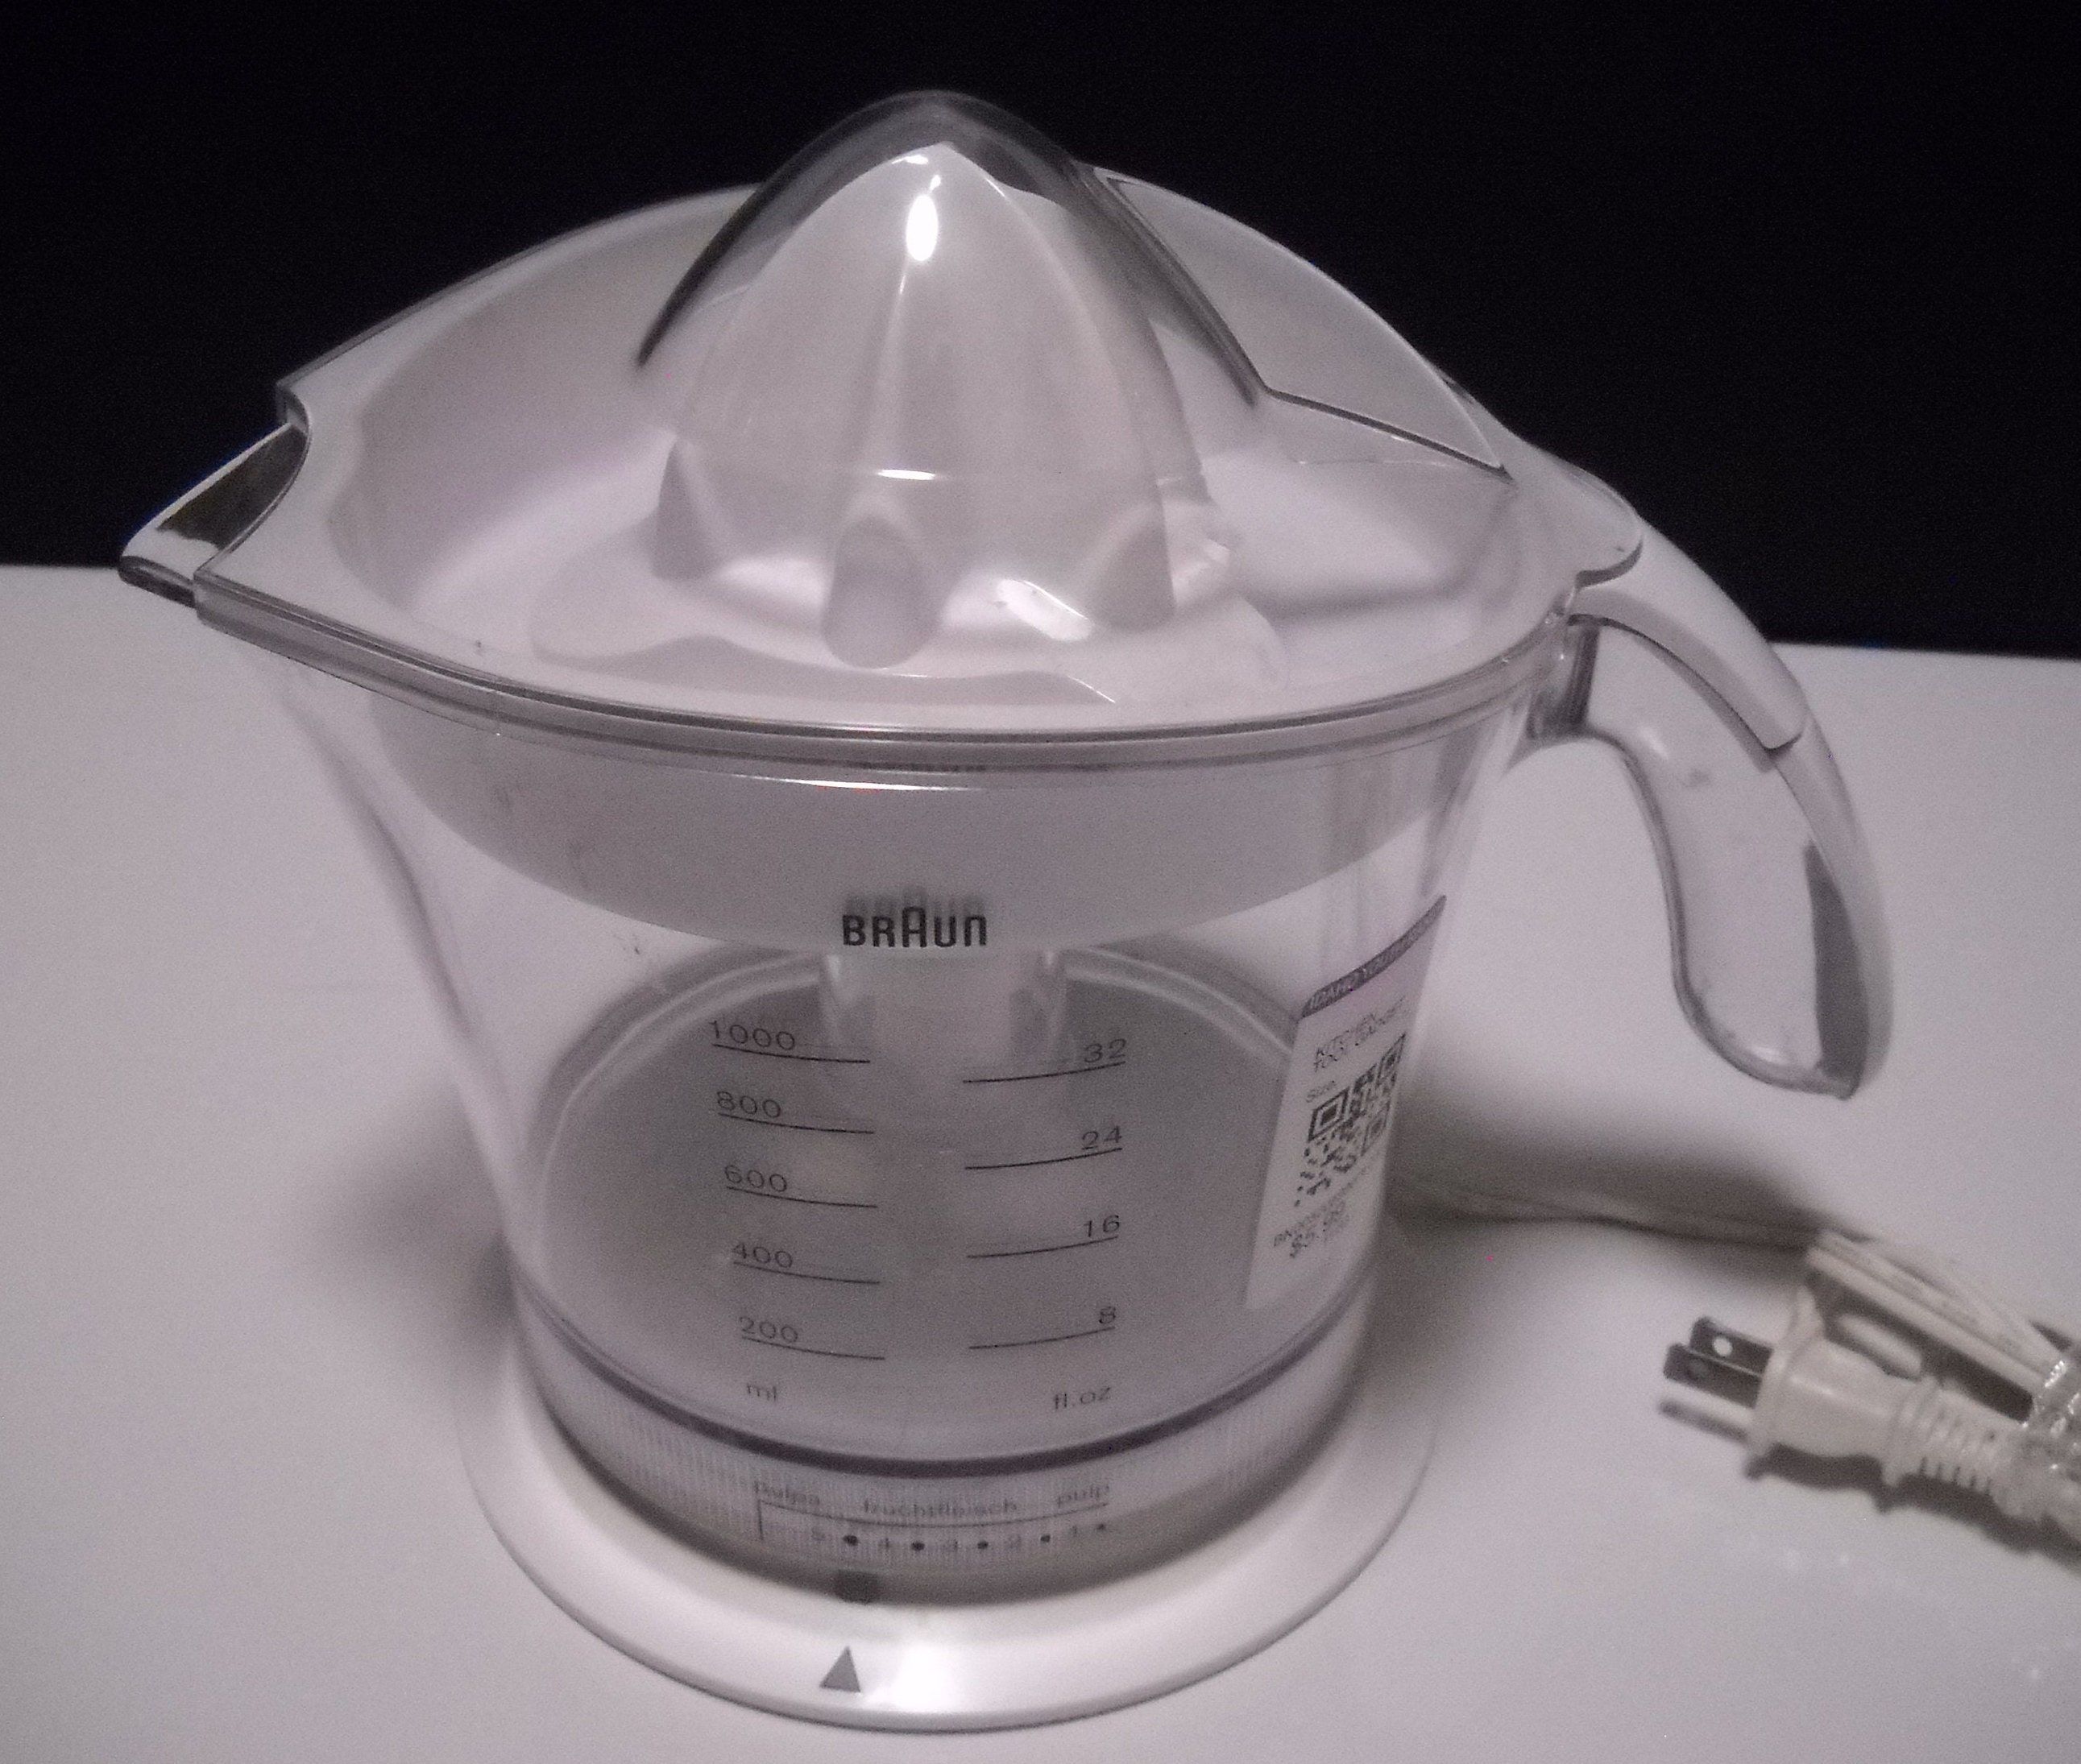 Used Once, Braun #4161 Citrus Electric 345B Type White Juicer, Dust Cover,  Great for Oranges, Limes & Lemons, 6.5 Tall 9  Wide